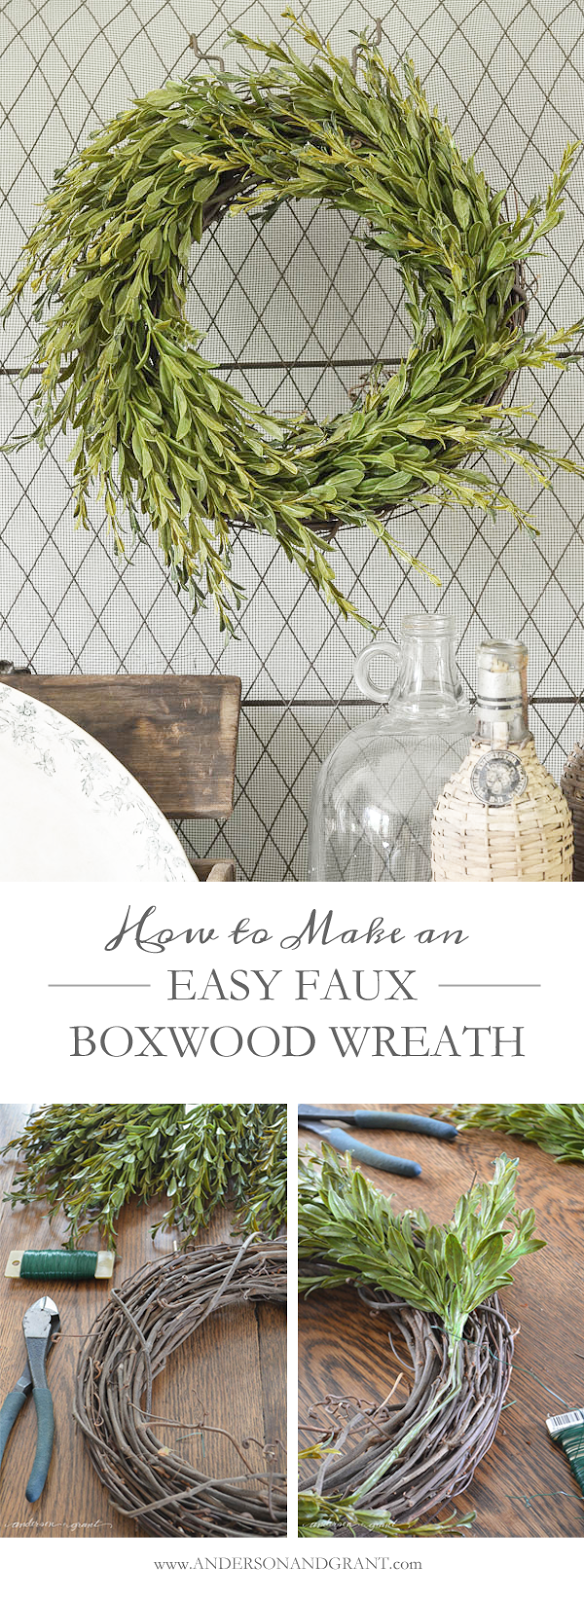 Create your own beautiful boxwood wreath for under $15!  Easy DIY Tutorial at www.andersonandgrant.com  #wreath #DIY #decorate